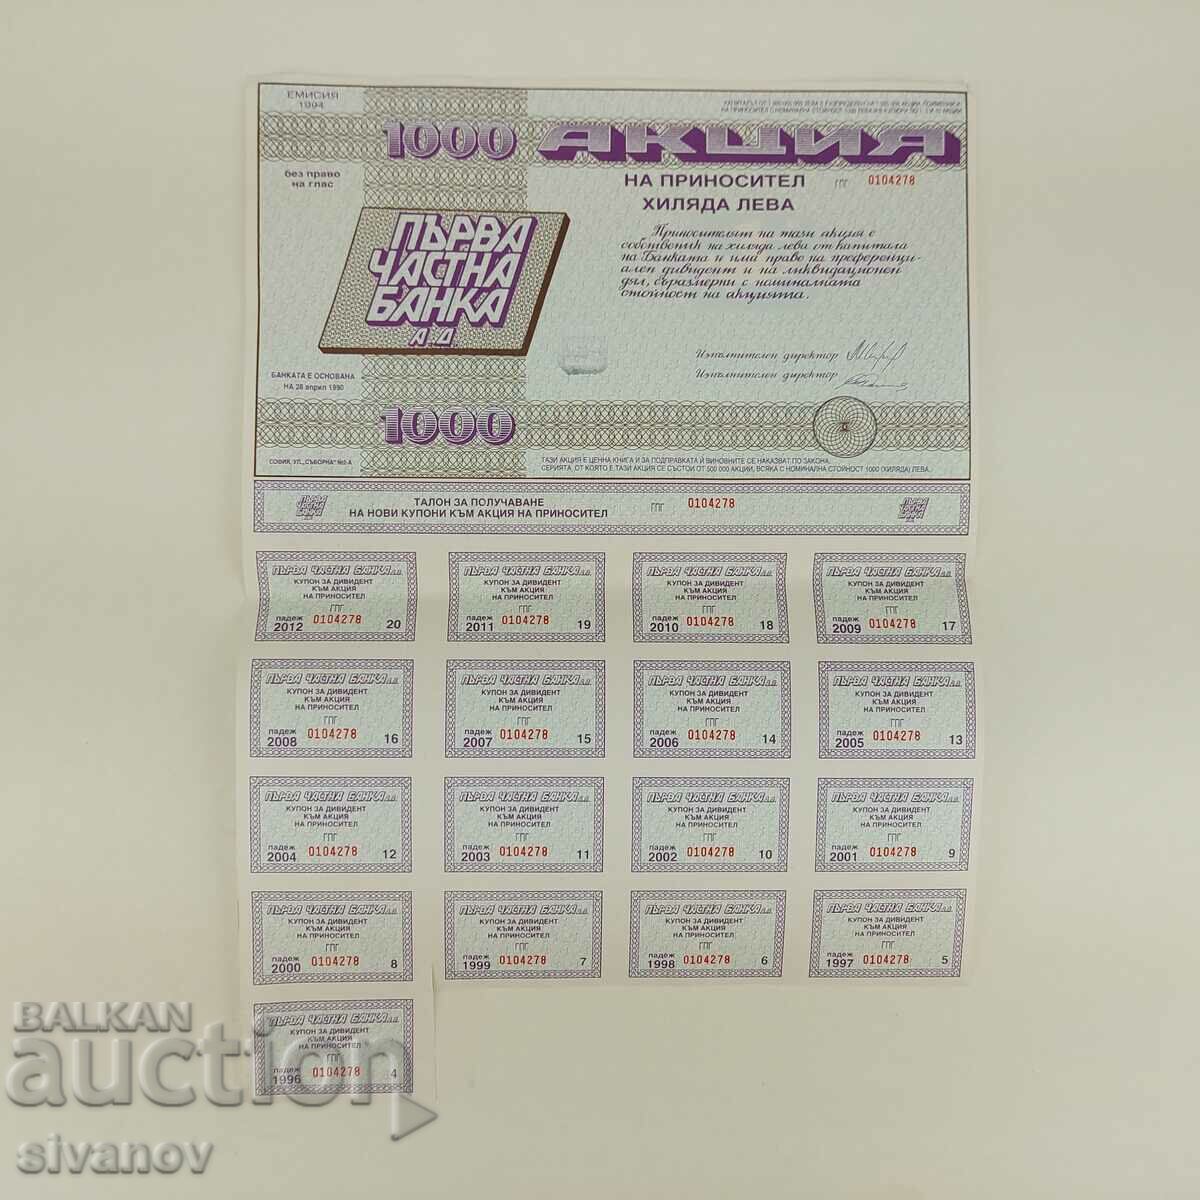 Share 1000 BGN First Private Bank Issue 1994 No. 4590